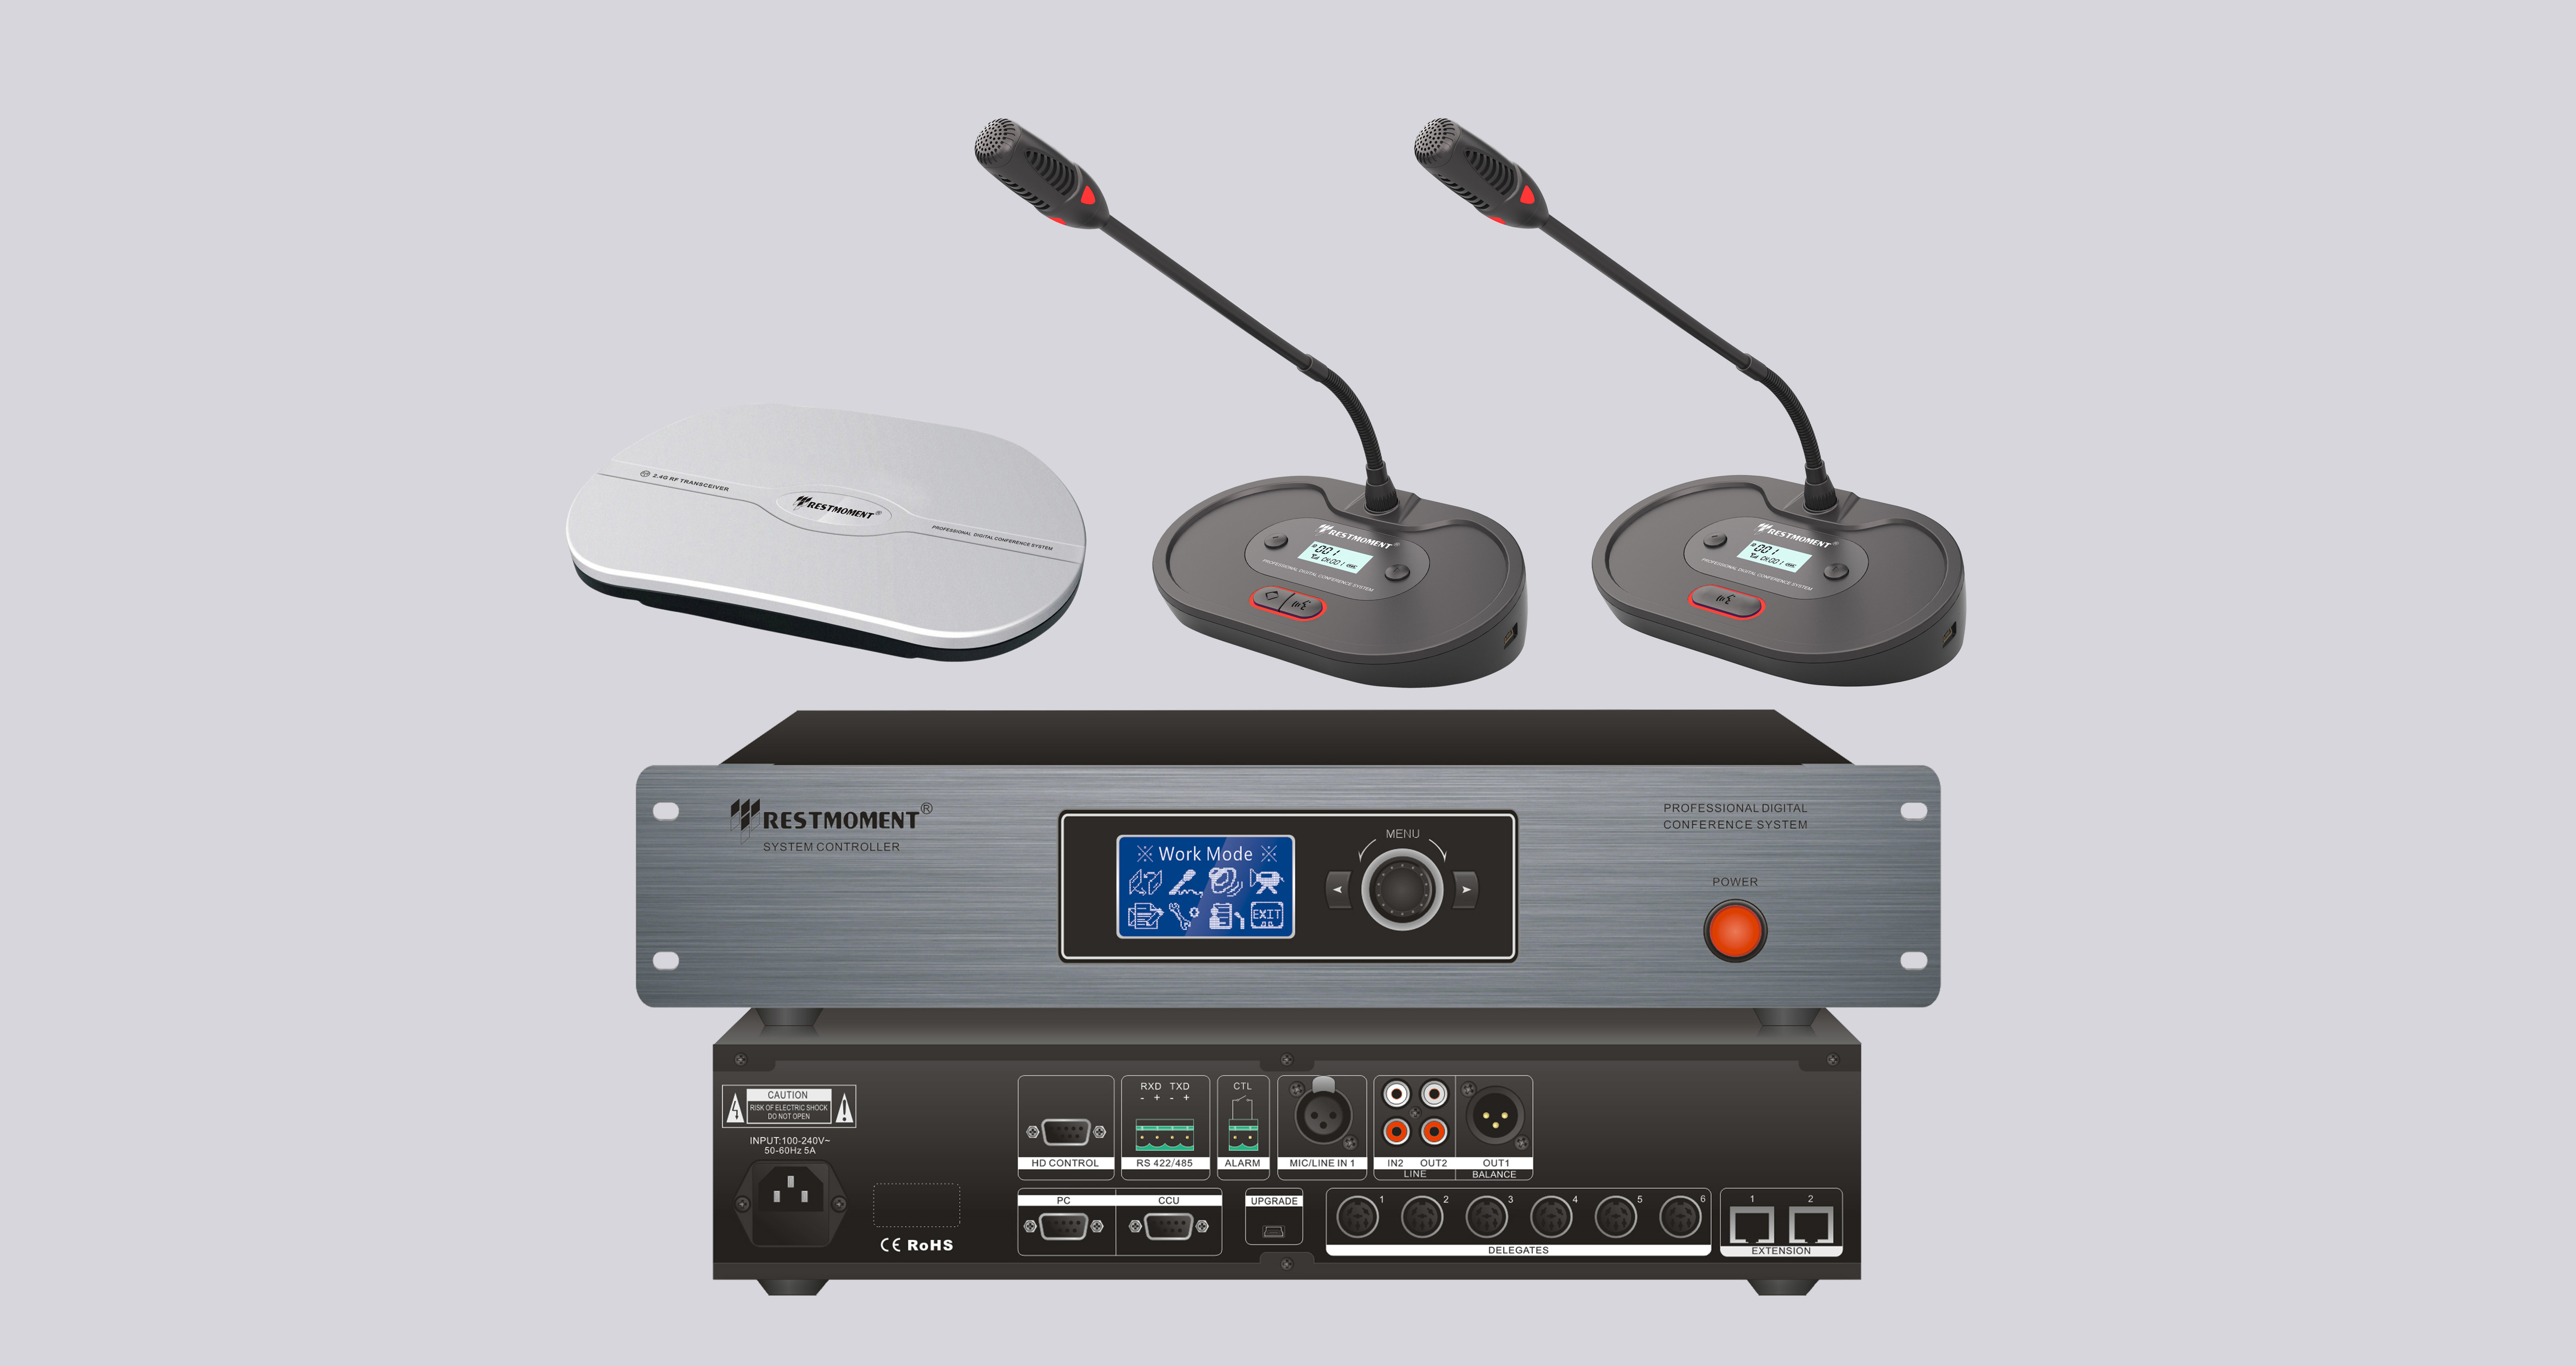 The 4th generation full digital wireless conference system